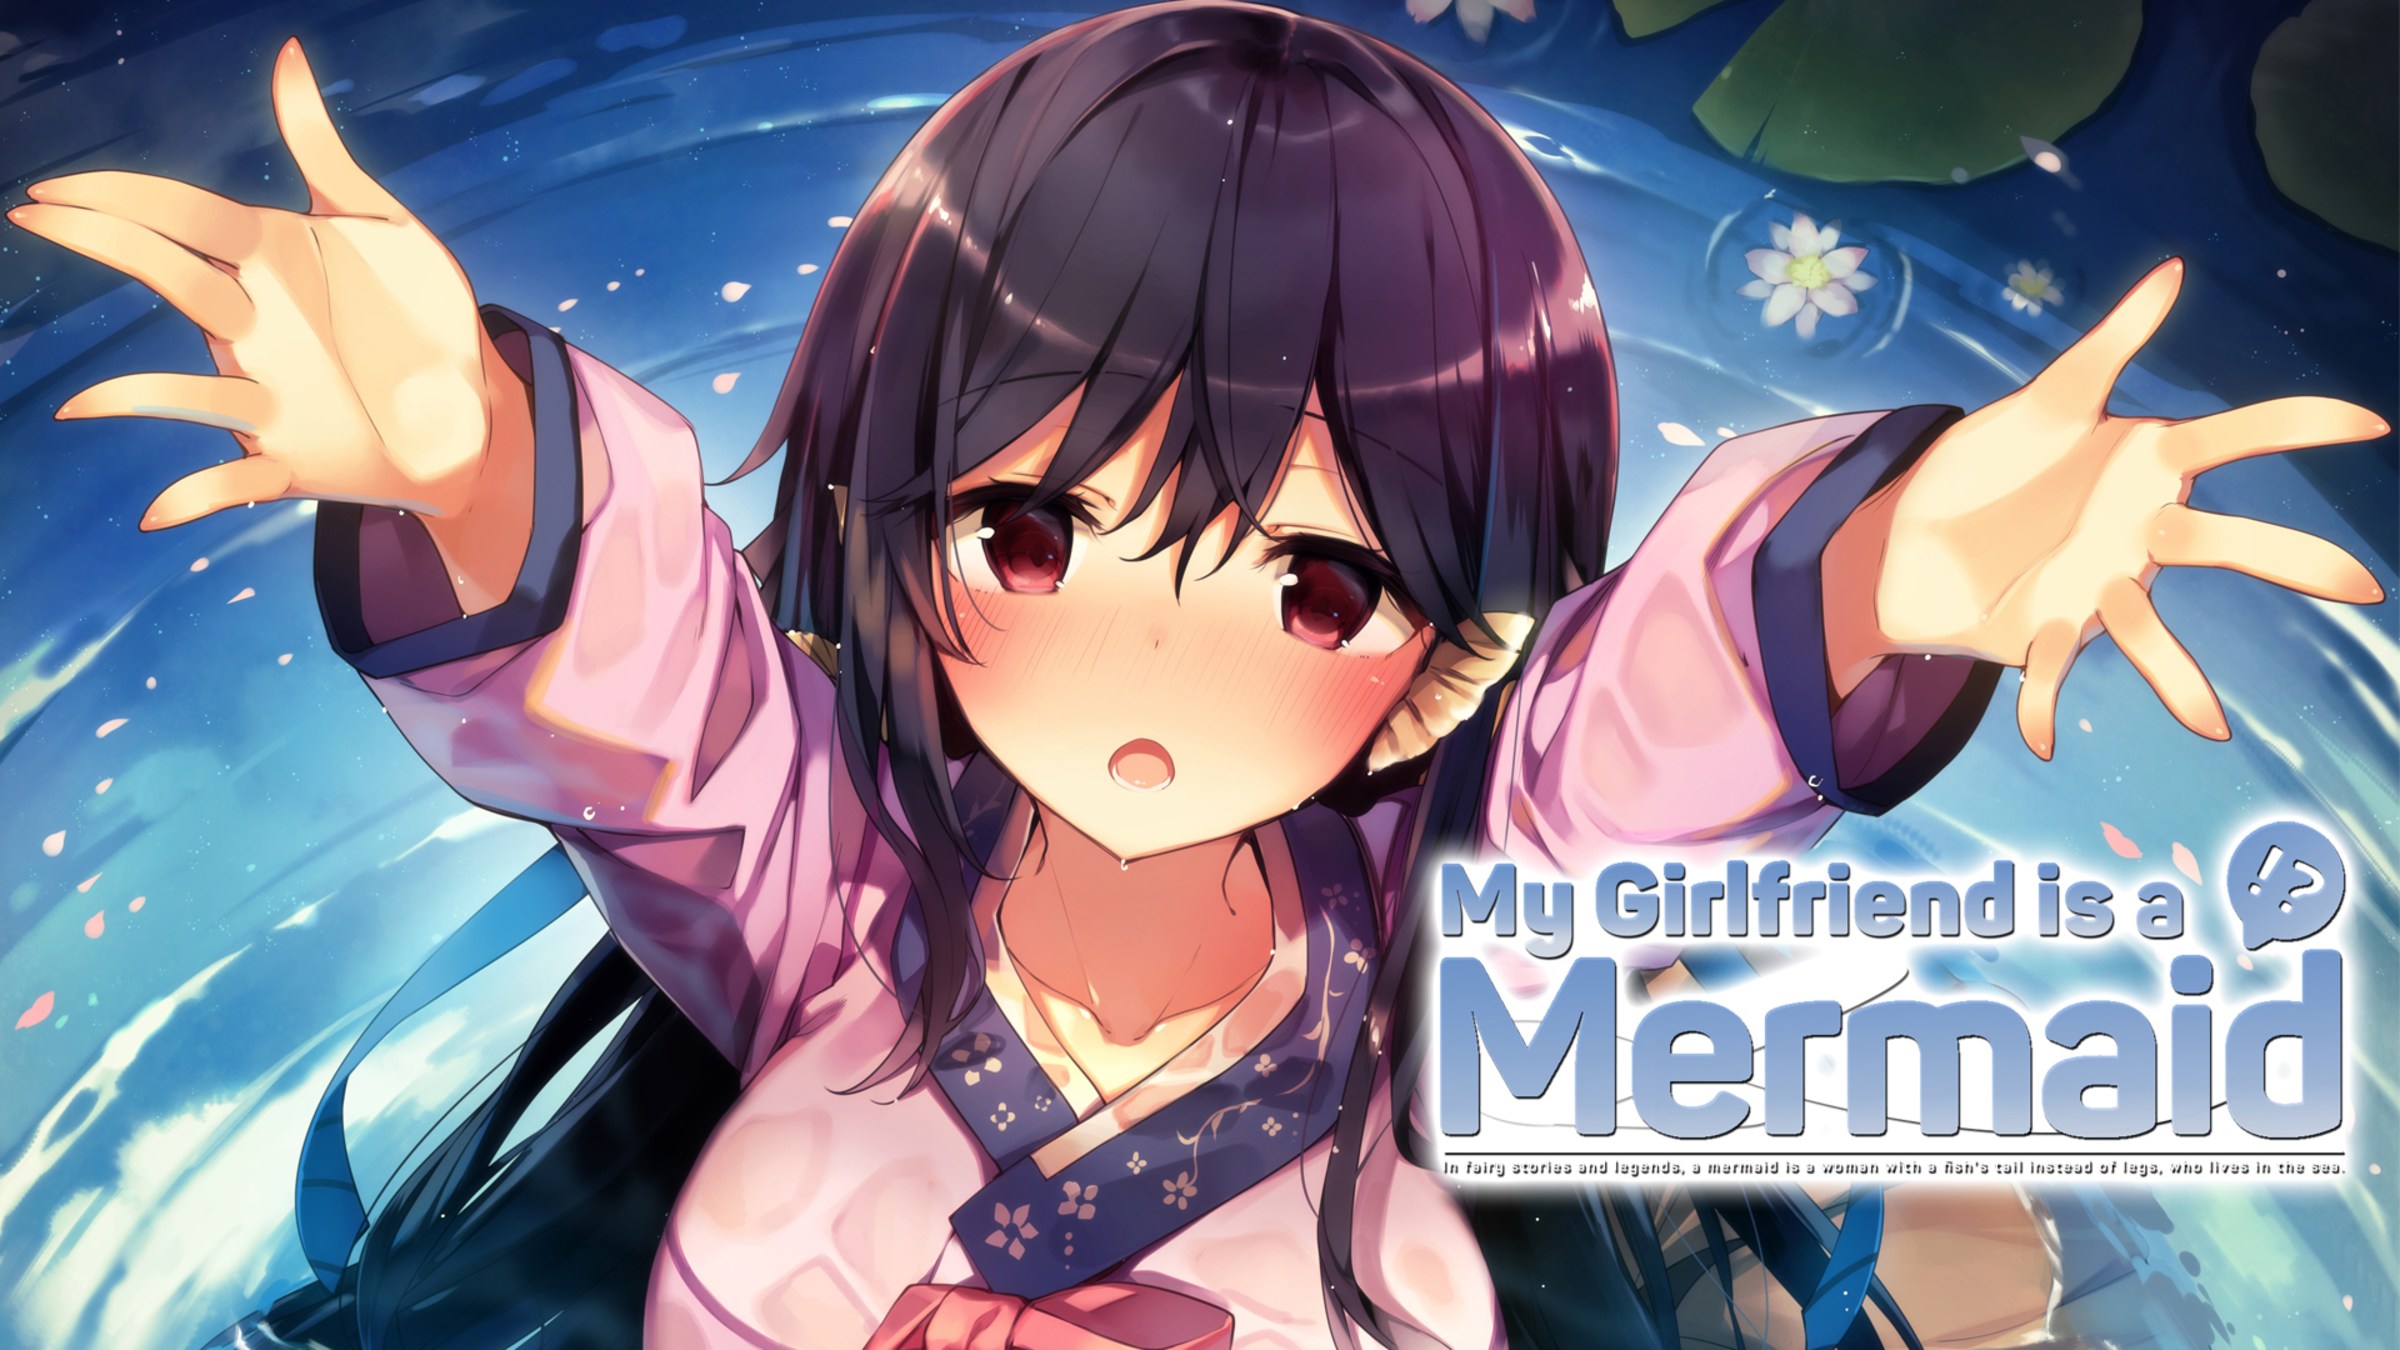 My Girlfriend is a Mermaid!? for Nintendo Switch - Nintendo Official Site